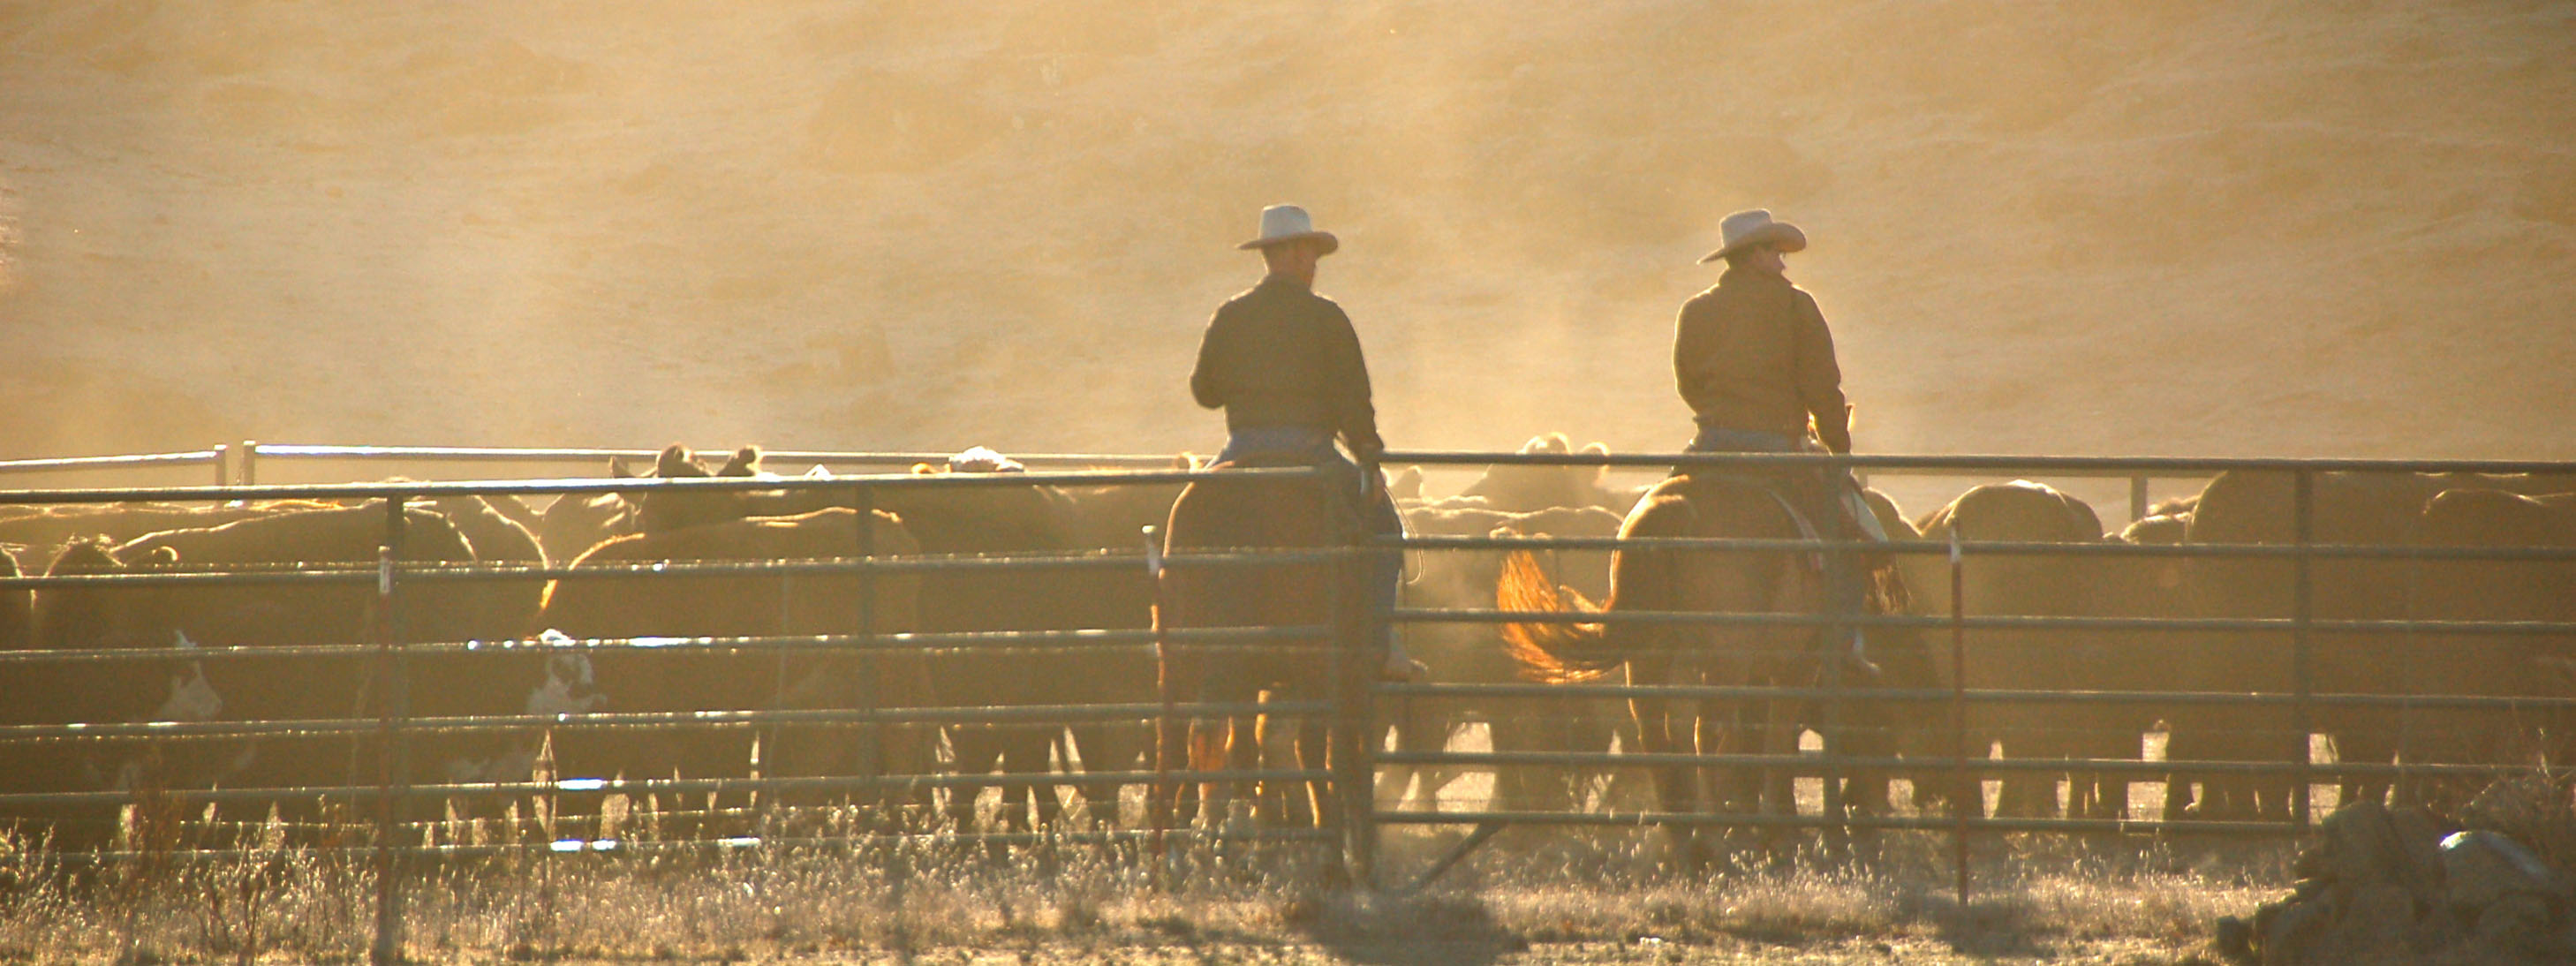 Two ranchers with cowboy hats on horseback in dusty corral filled with cattle